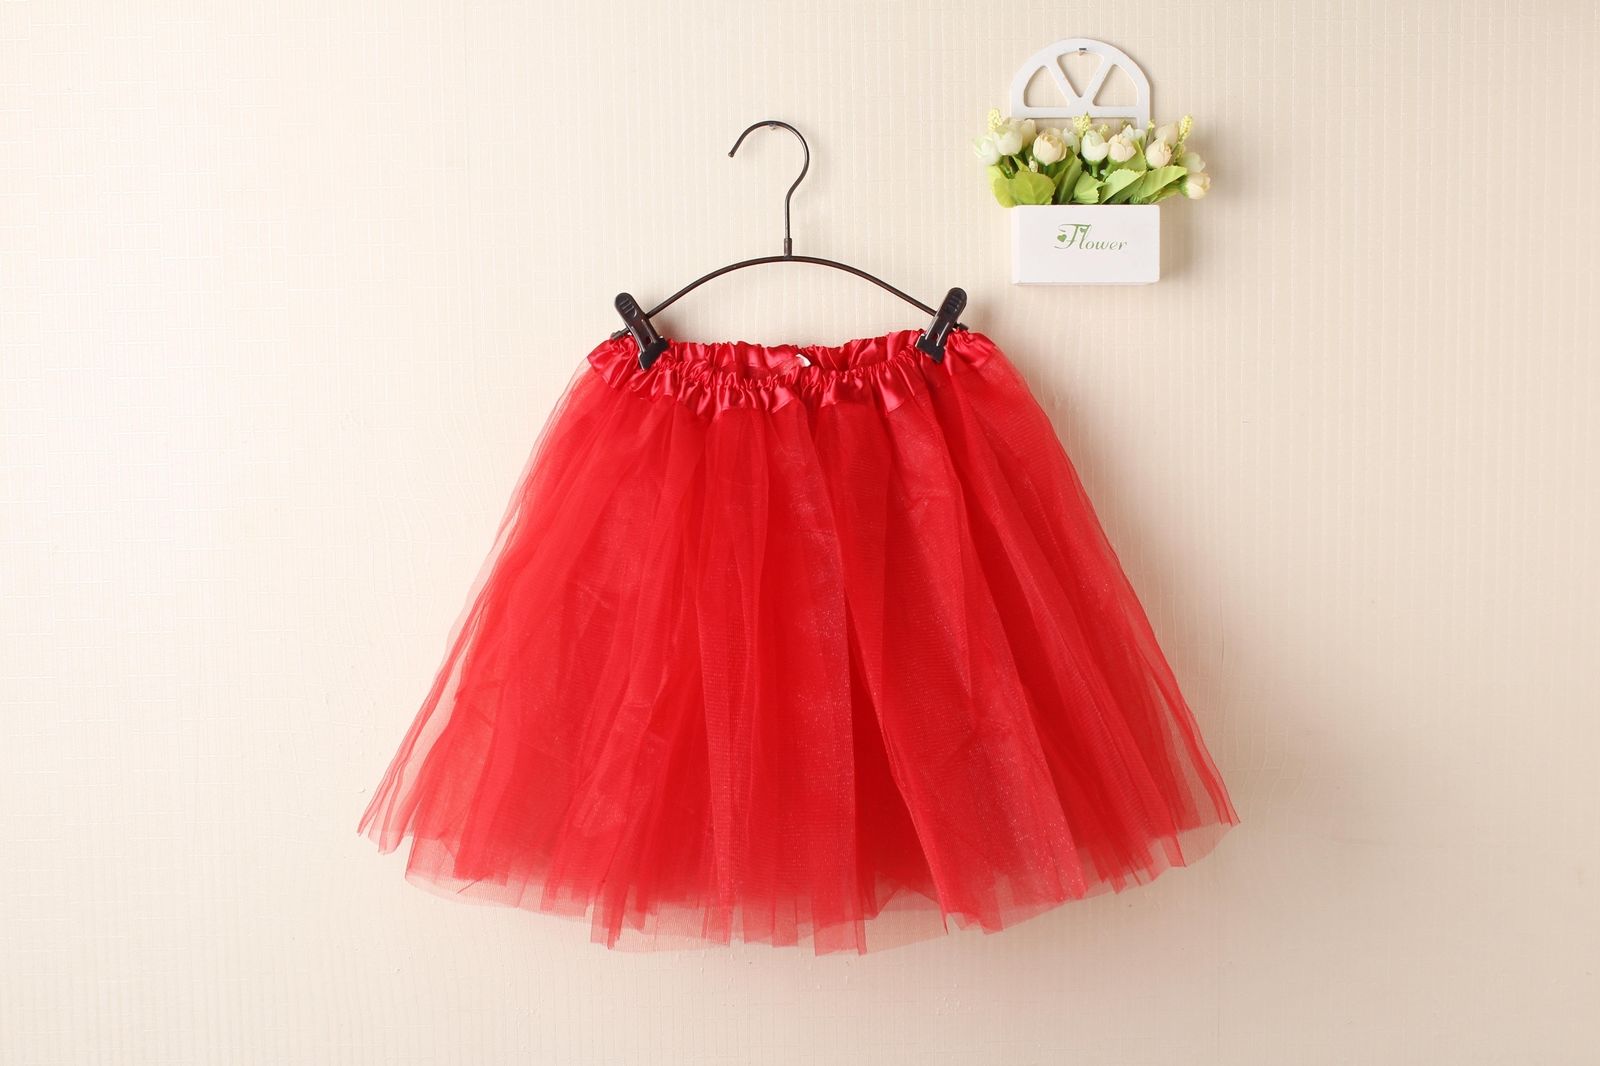 New Adults Tulle Tutu Skirt Dressup Party Costume Ballet Womens Girls Dance Wear, Red, Adults